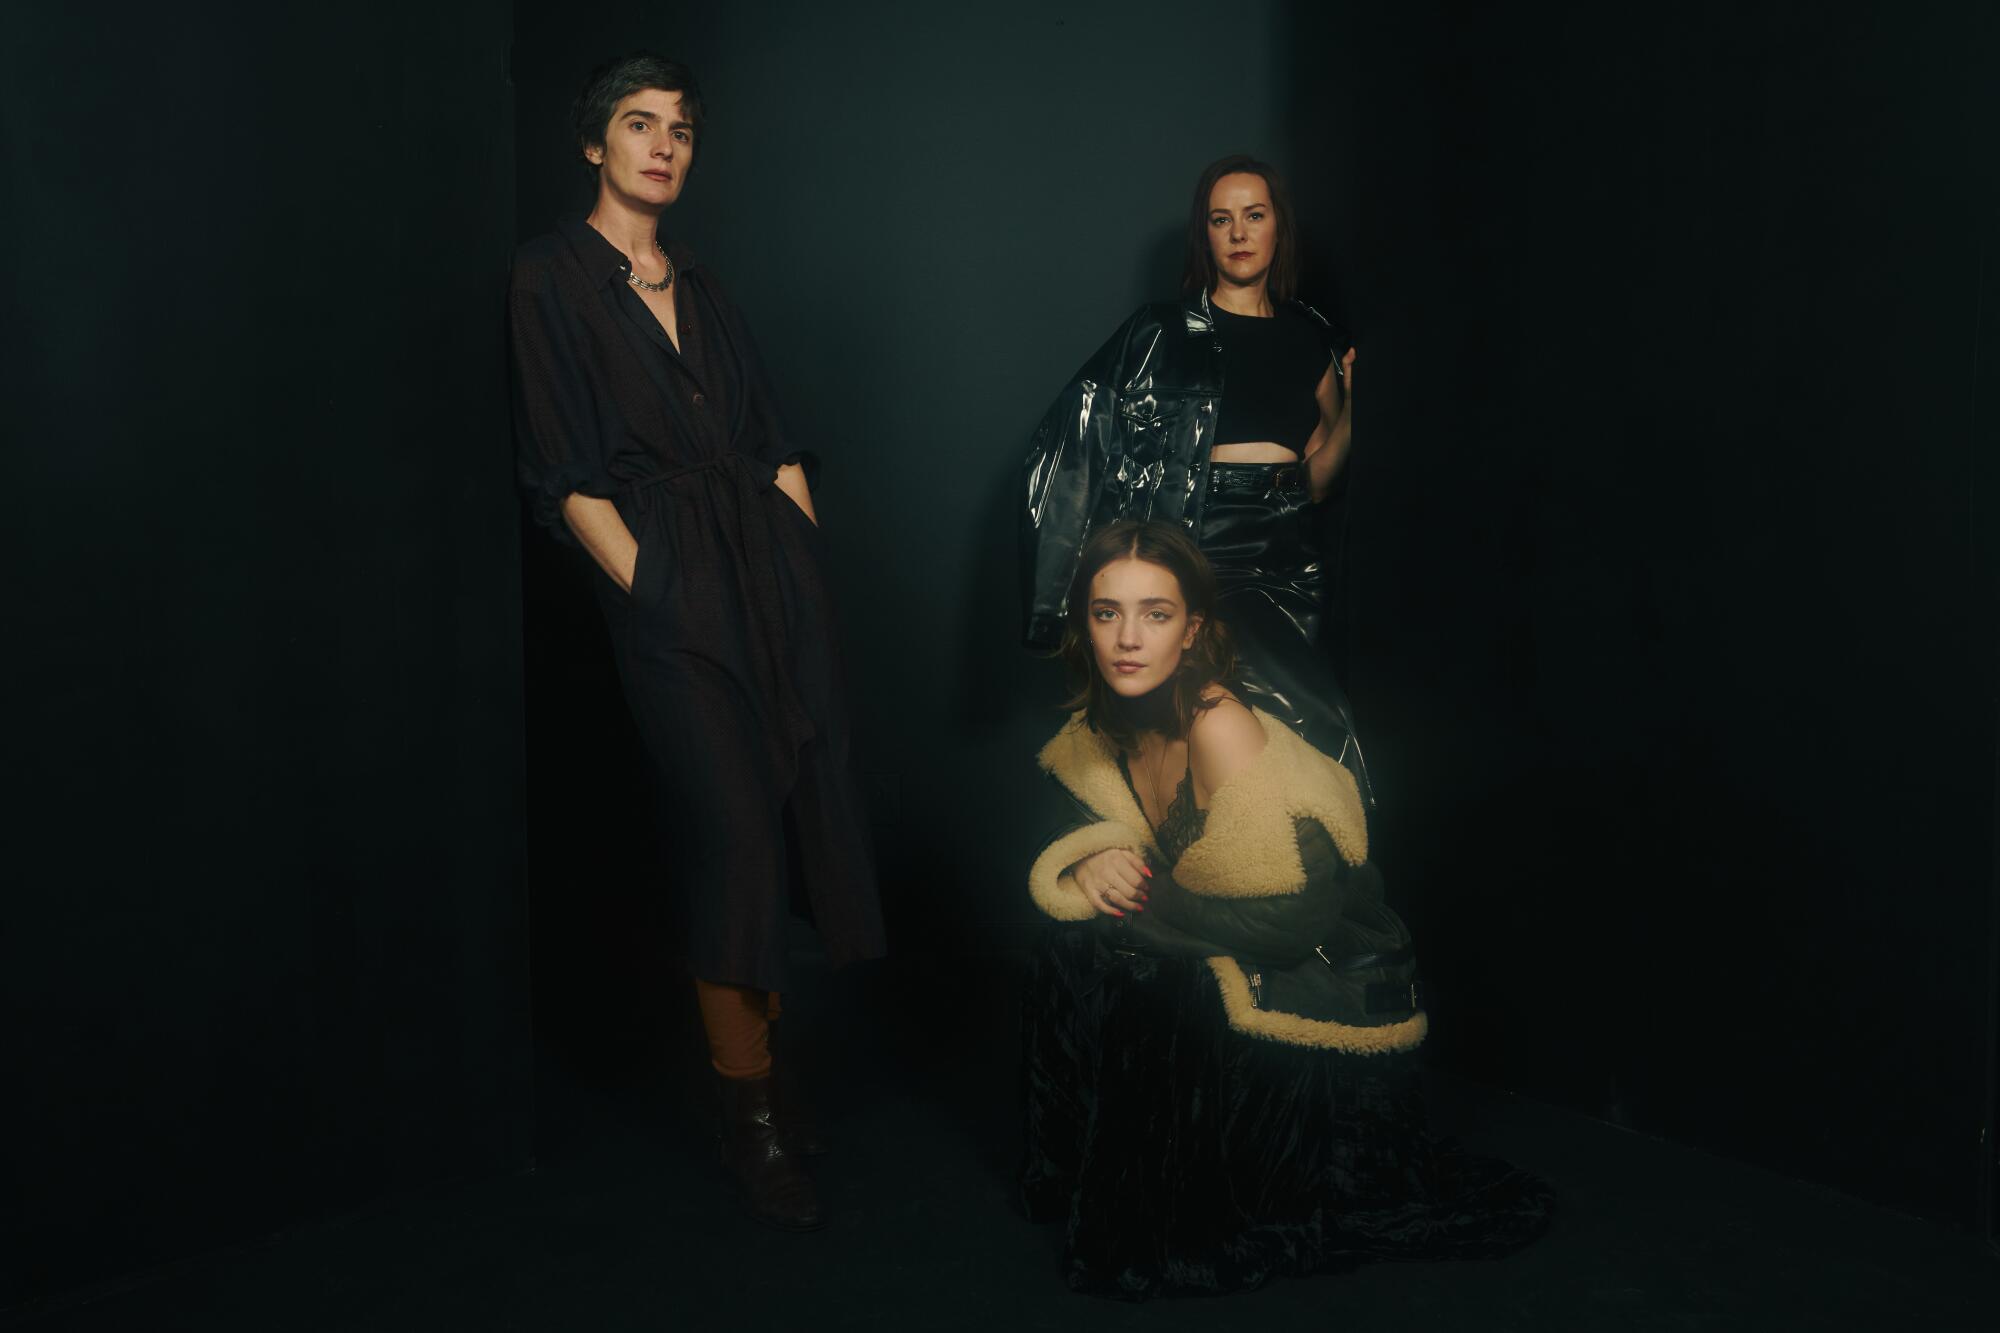 Gaby Hoffman, Talia Ryder and Jena Malone of "Little Death"